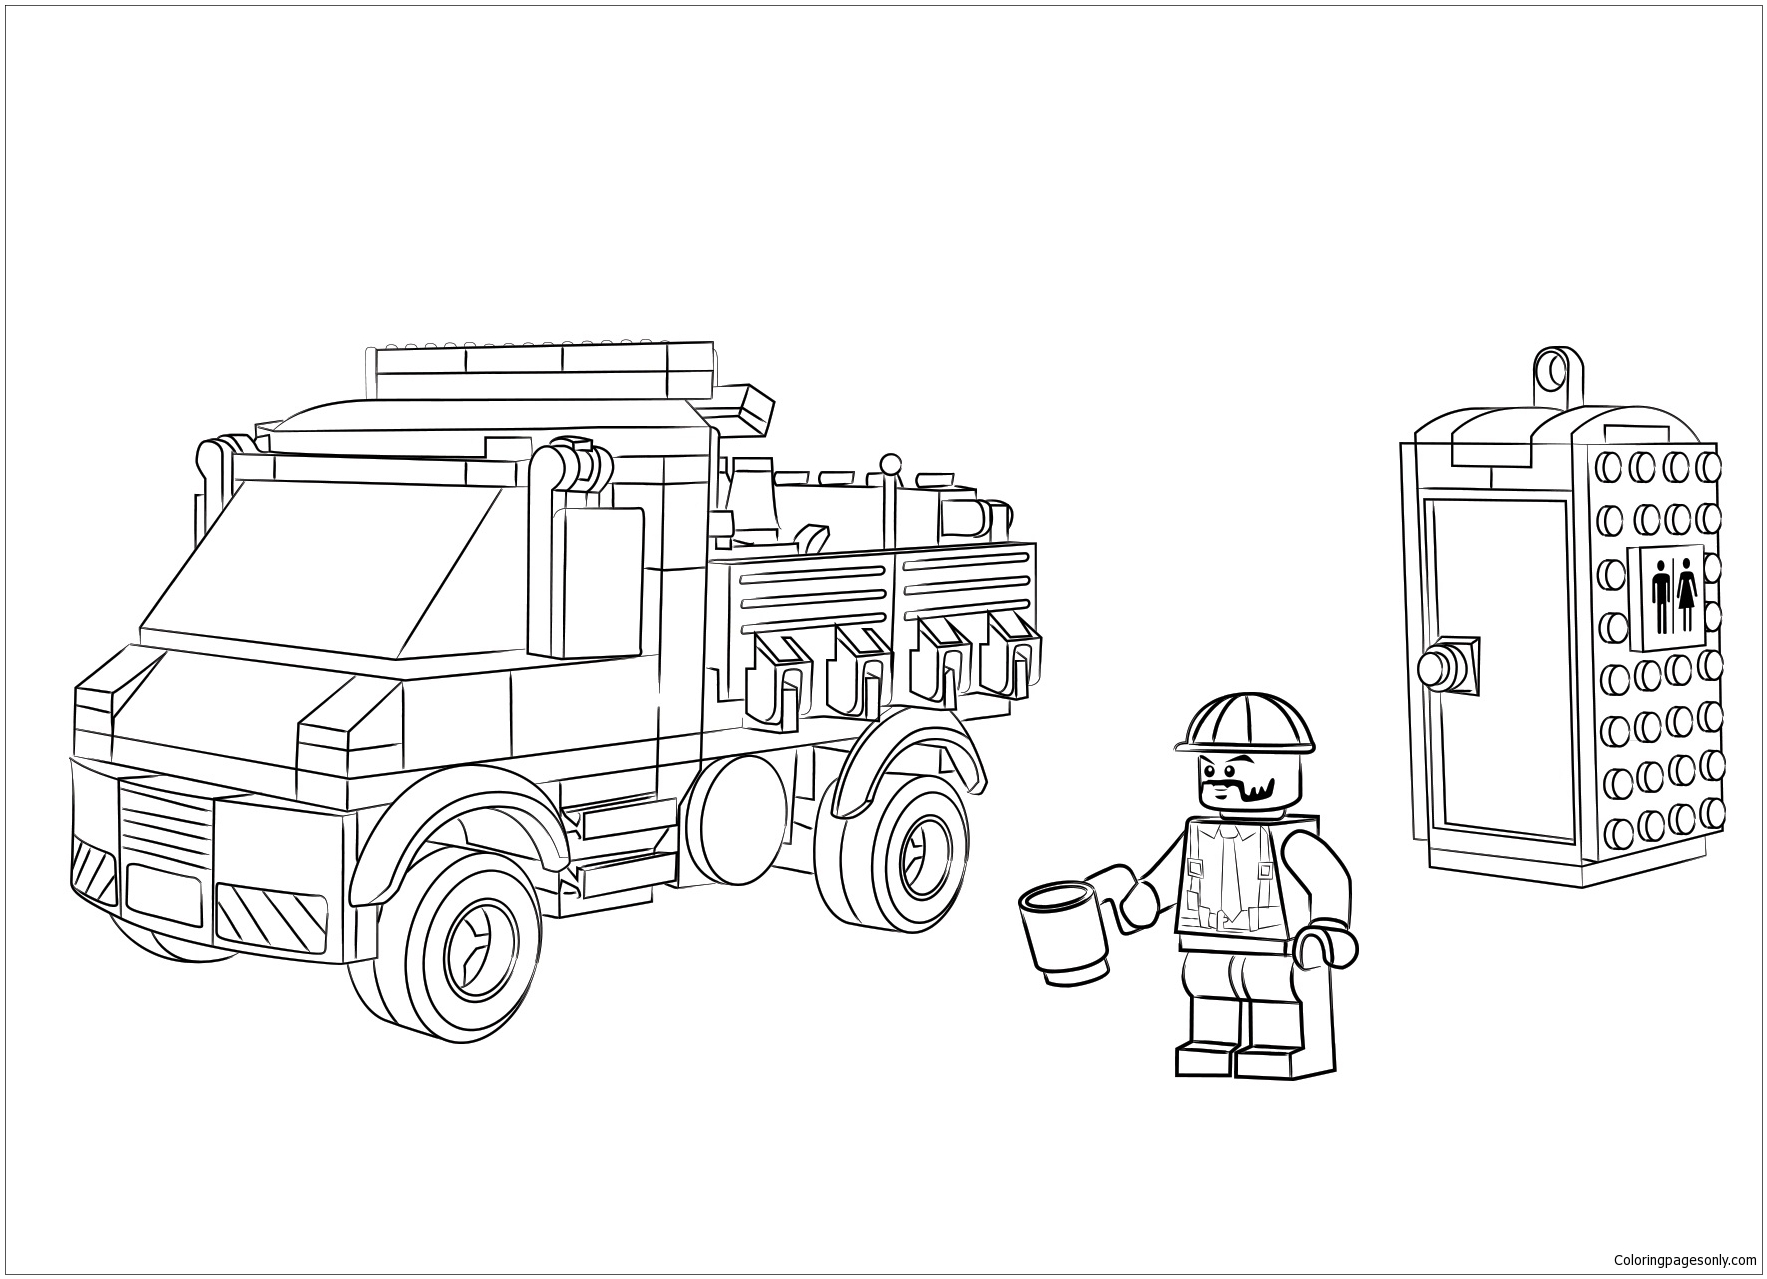 Download Lego City 1 Coloring Pages - Toys and Dolls Coloring Pages - Free Printable Coloring Pages Online